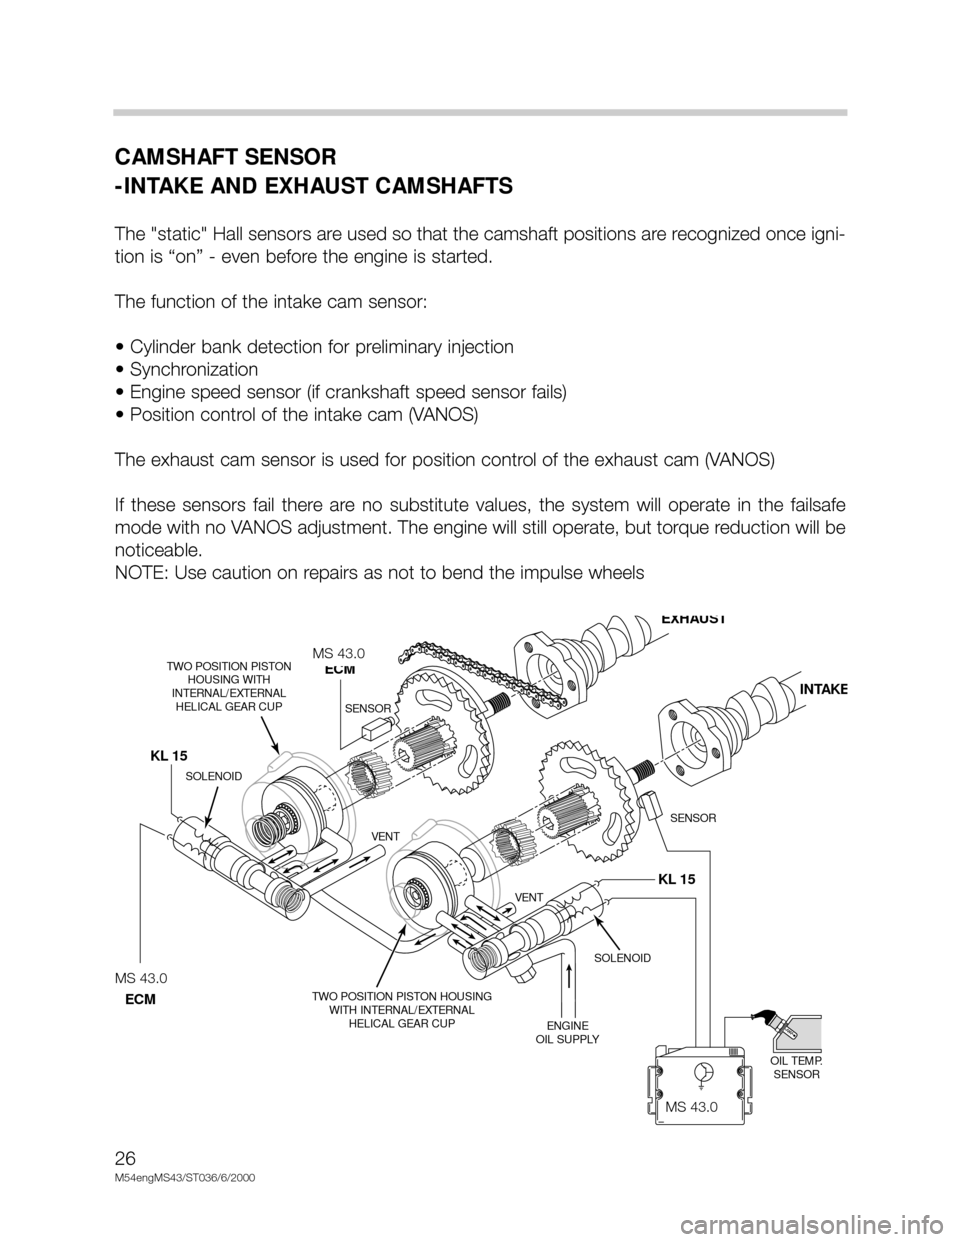 BMW X5 2005 E53 M54 Engine User Guide 26
M54engMS43/ST036/6/2000
CAMSHAFT SENSOR
-INTAKE AND EXHAUST CAMSHAFTS
The "static" Hall sensors are used so that the camshaft positions are recognized once igni-
tion is “on” - even before the 